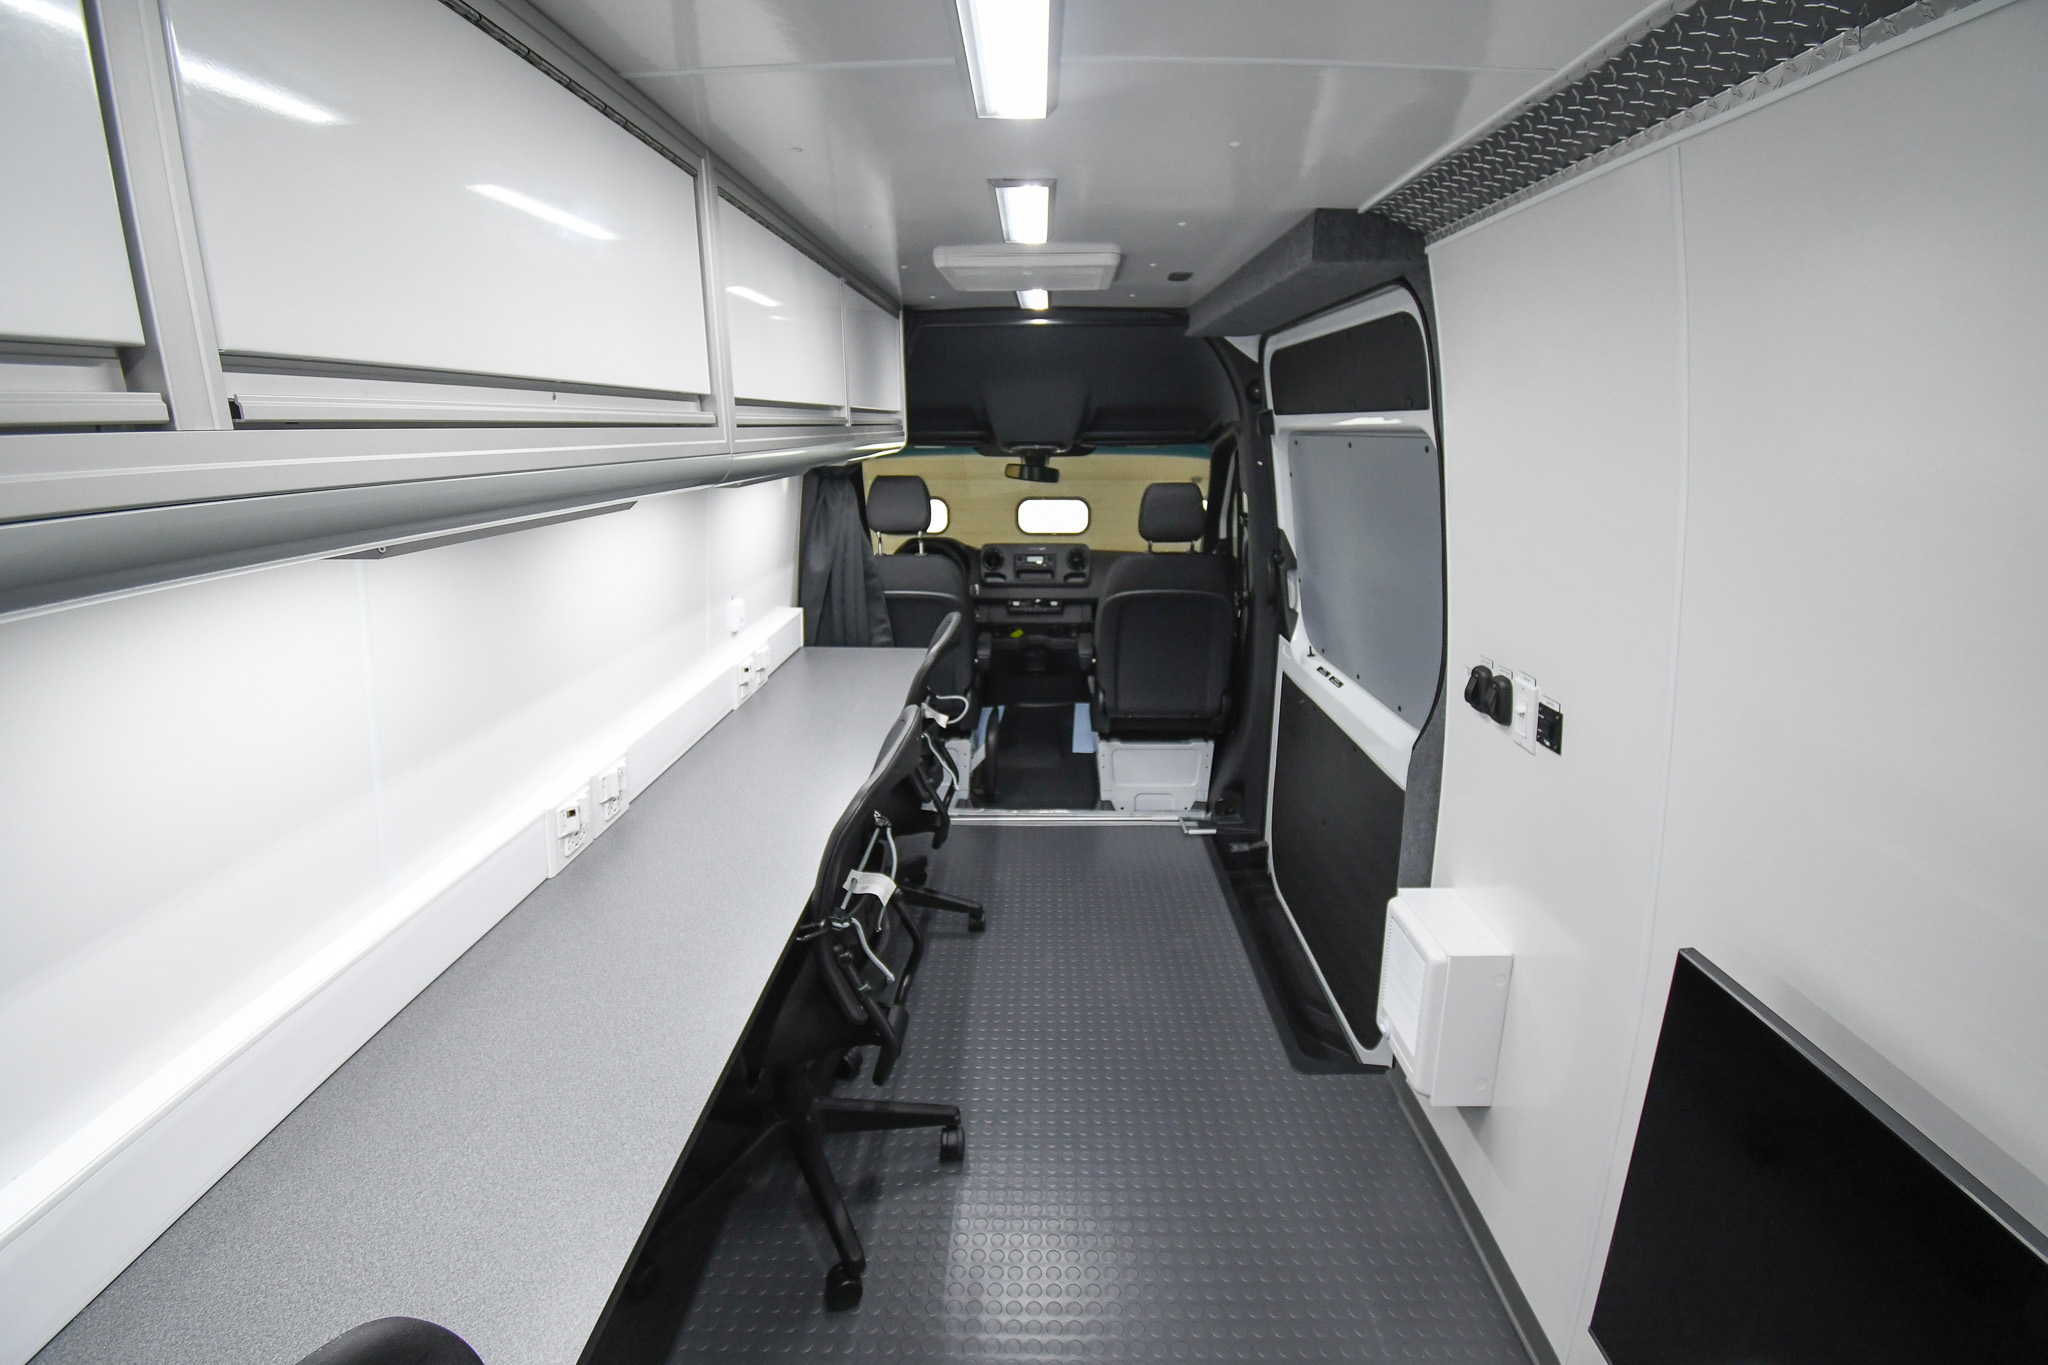 A back-to-front view inside the units for San Fransisco & Signal Hill, CA.